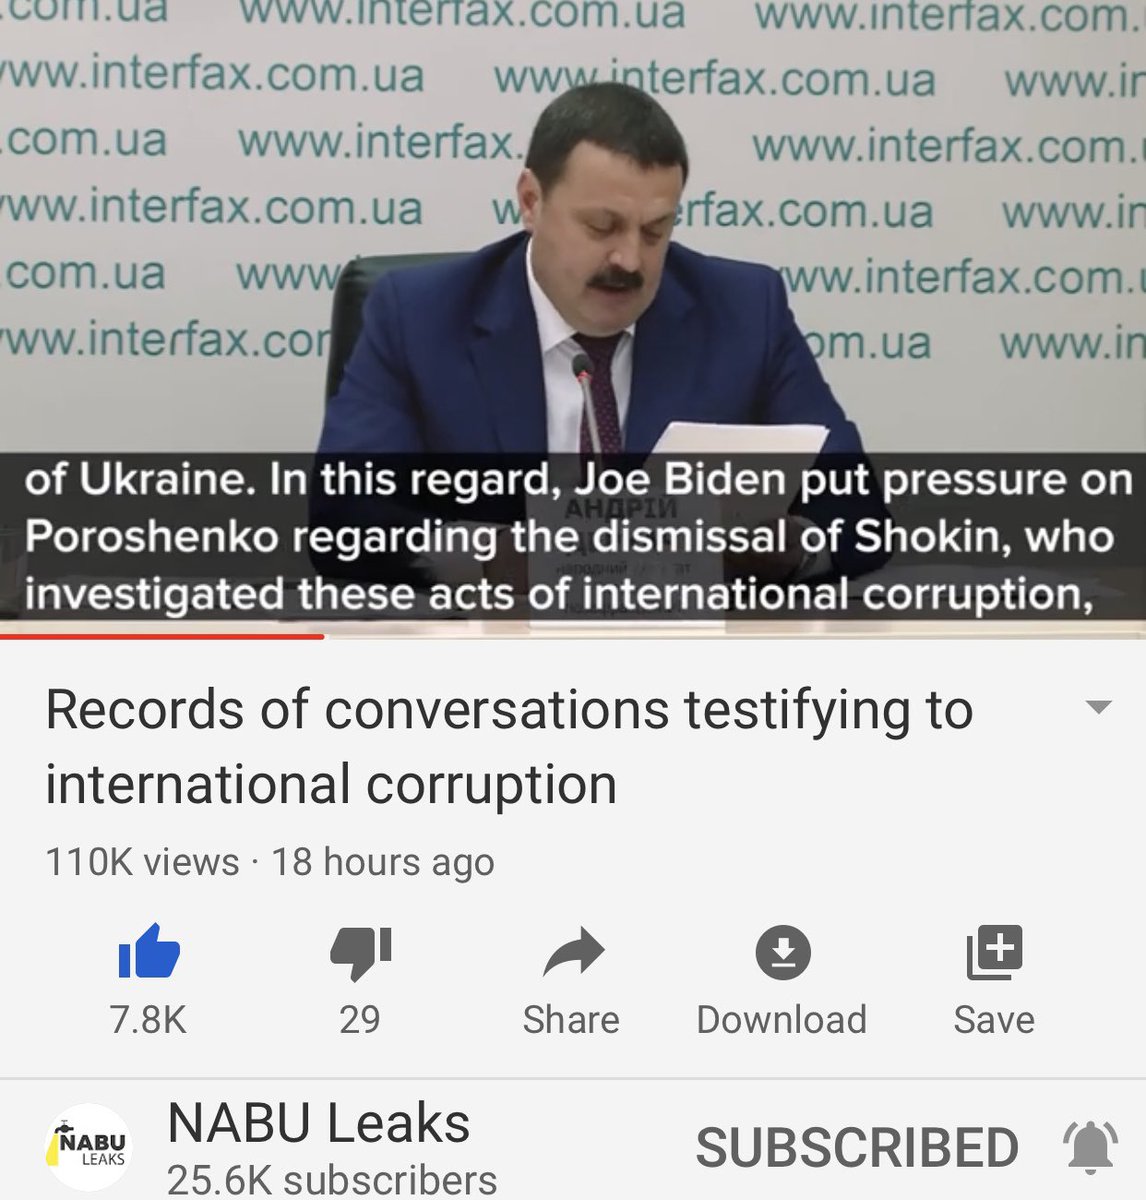 This is where he discussed how Biden pressured President Poroshenko to get rid of Shokin, the investigator, who was onto the scheme.